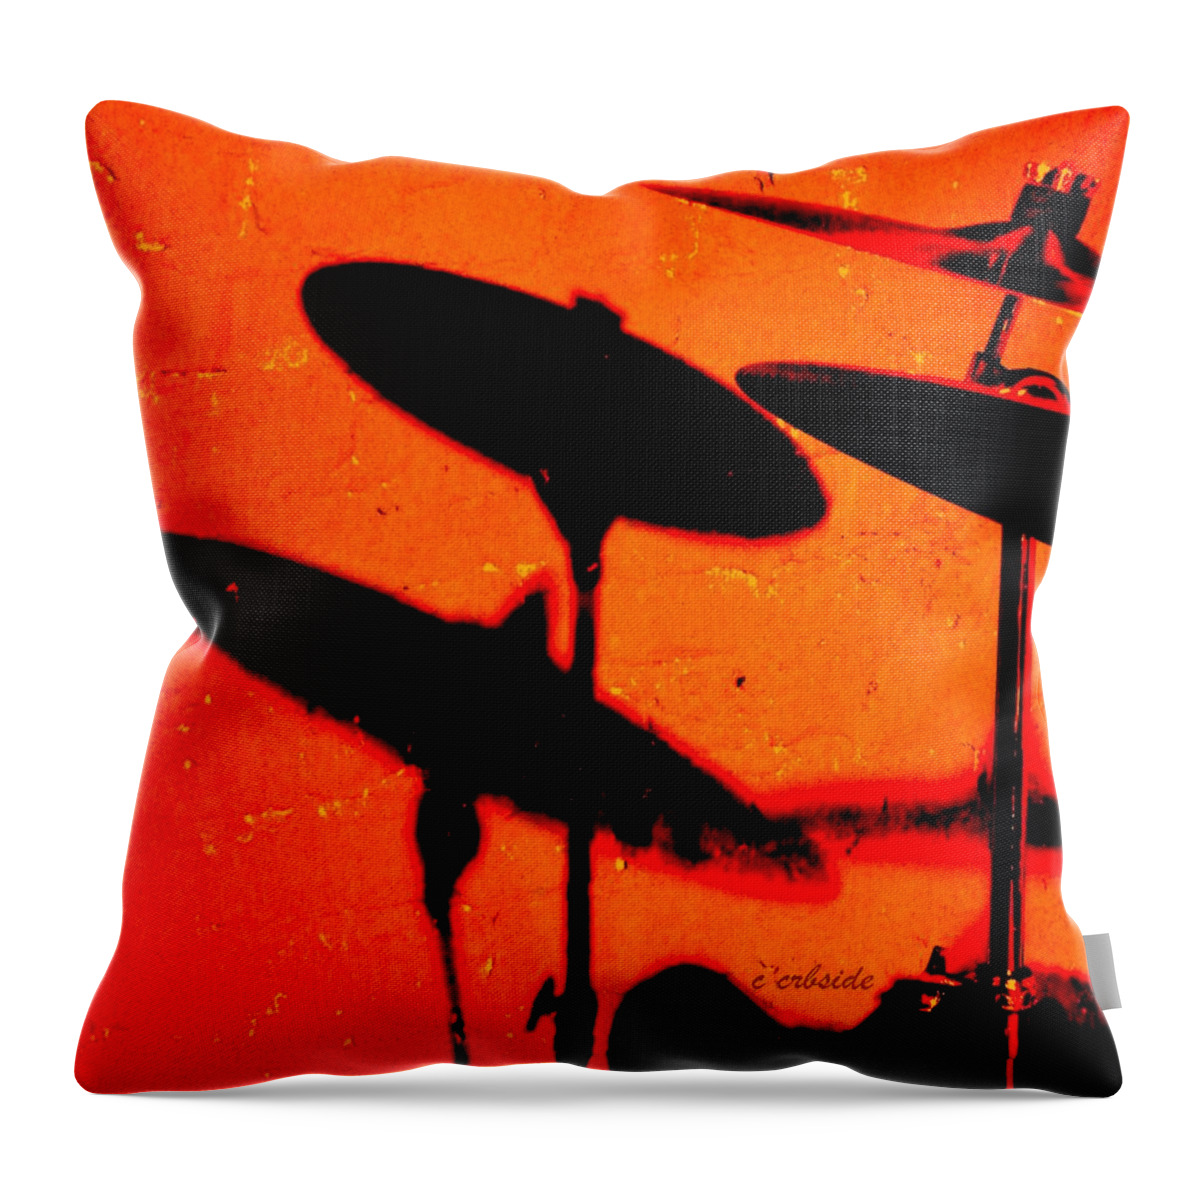 Cymbals Throw Pillow featuring the photograph Cymbalic by Chris Berry